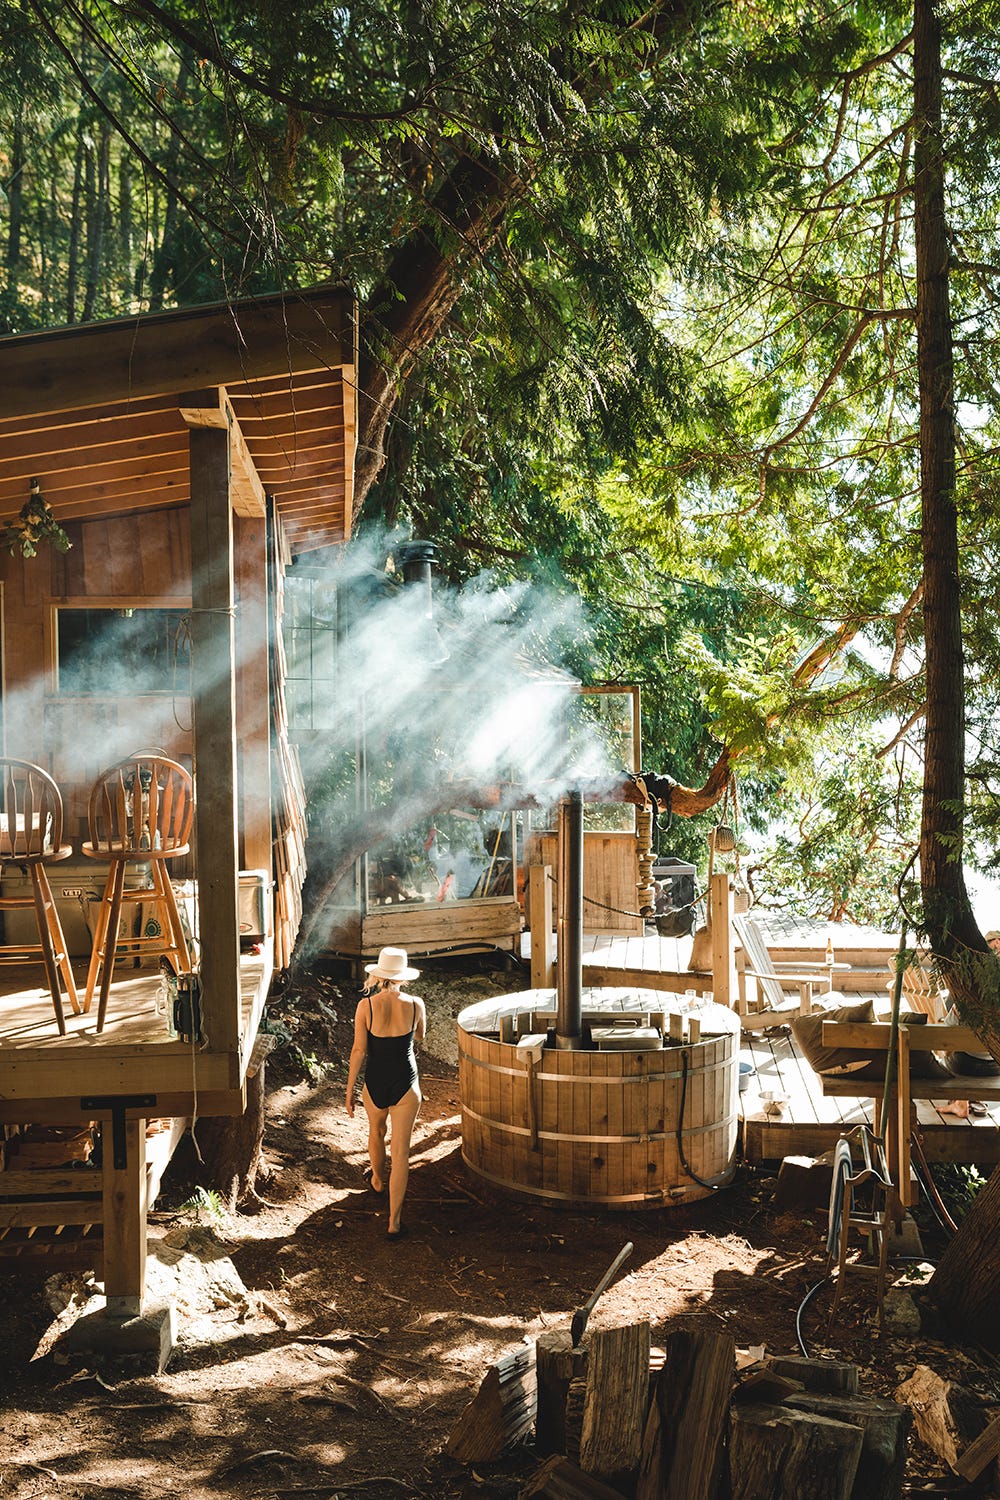 Wood Fired Hot Tubs: Soul Soothing Genius or Just Instabait?